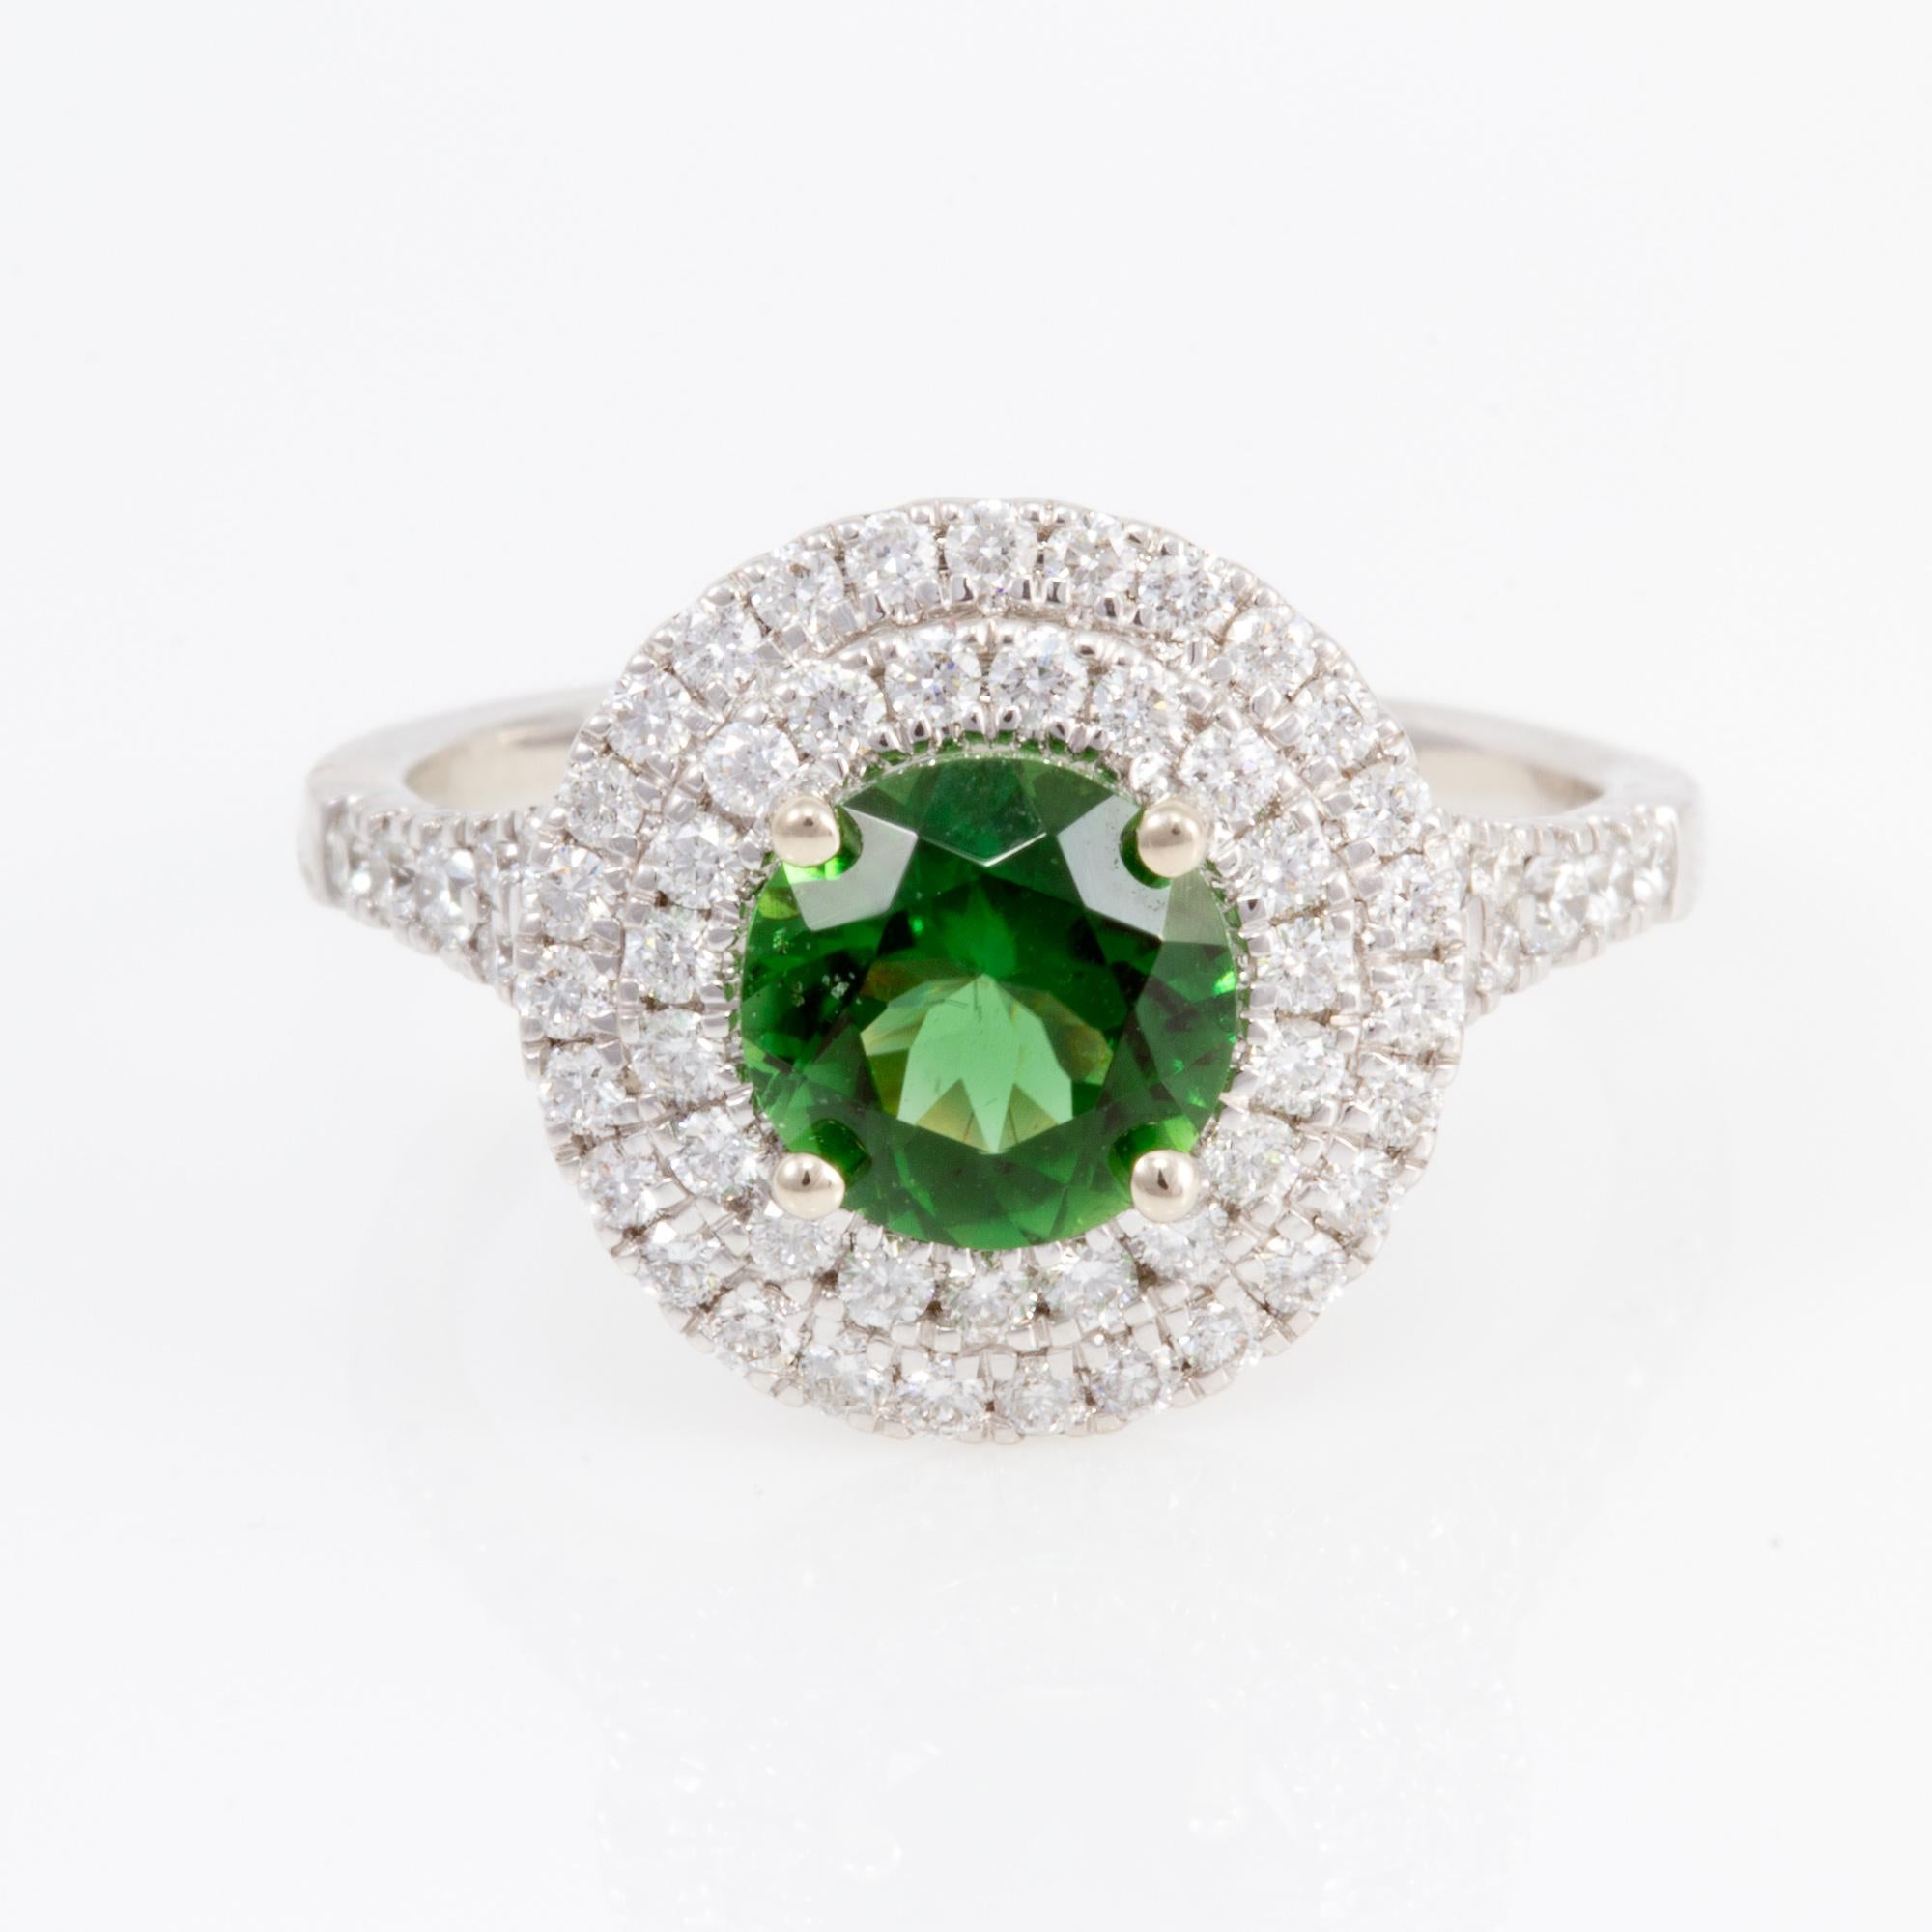 Round Cut Exceptionally Well Cut 1.26 Carat Chrome Tourmaline and Diamond Ring For Sale